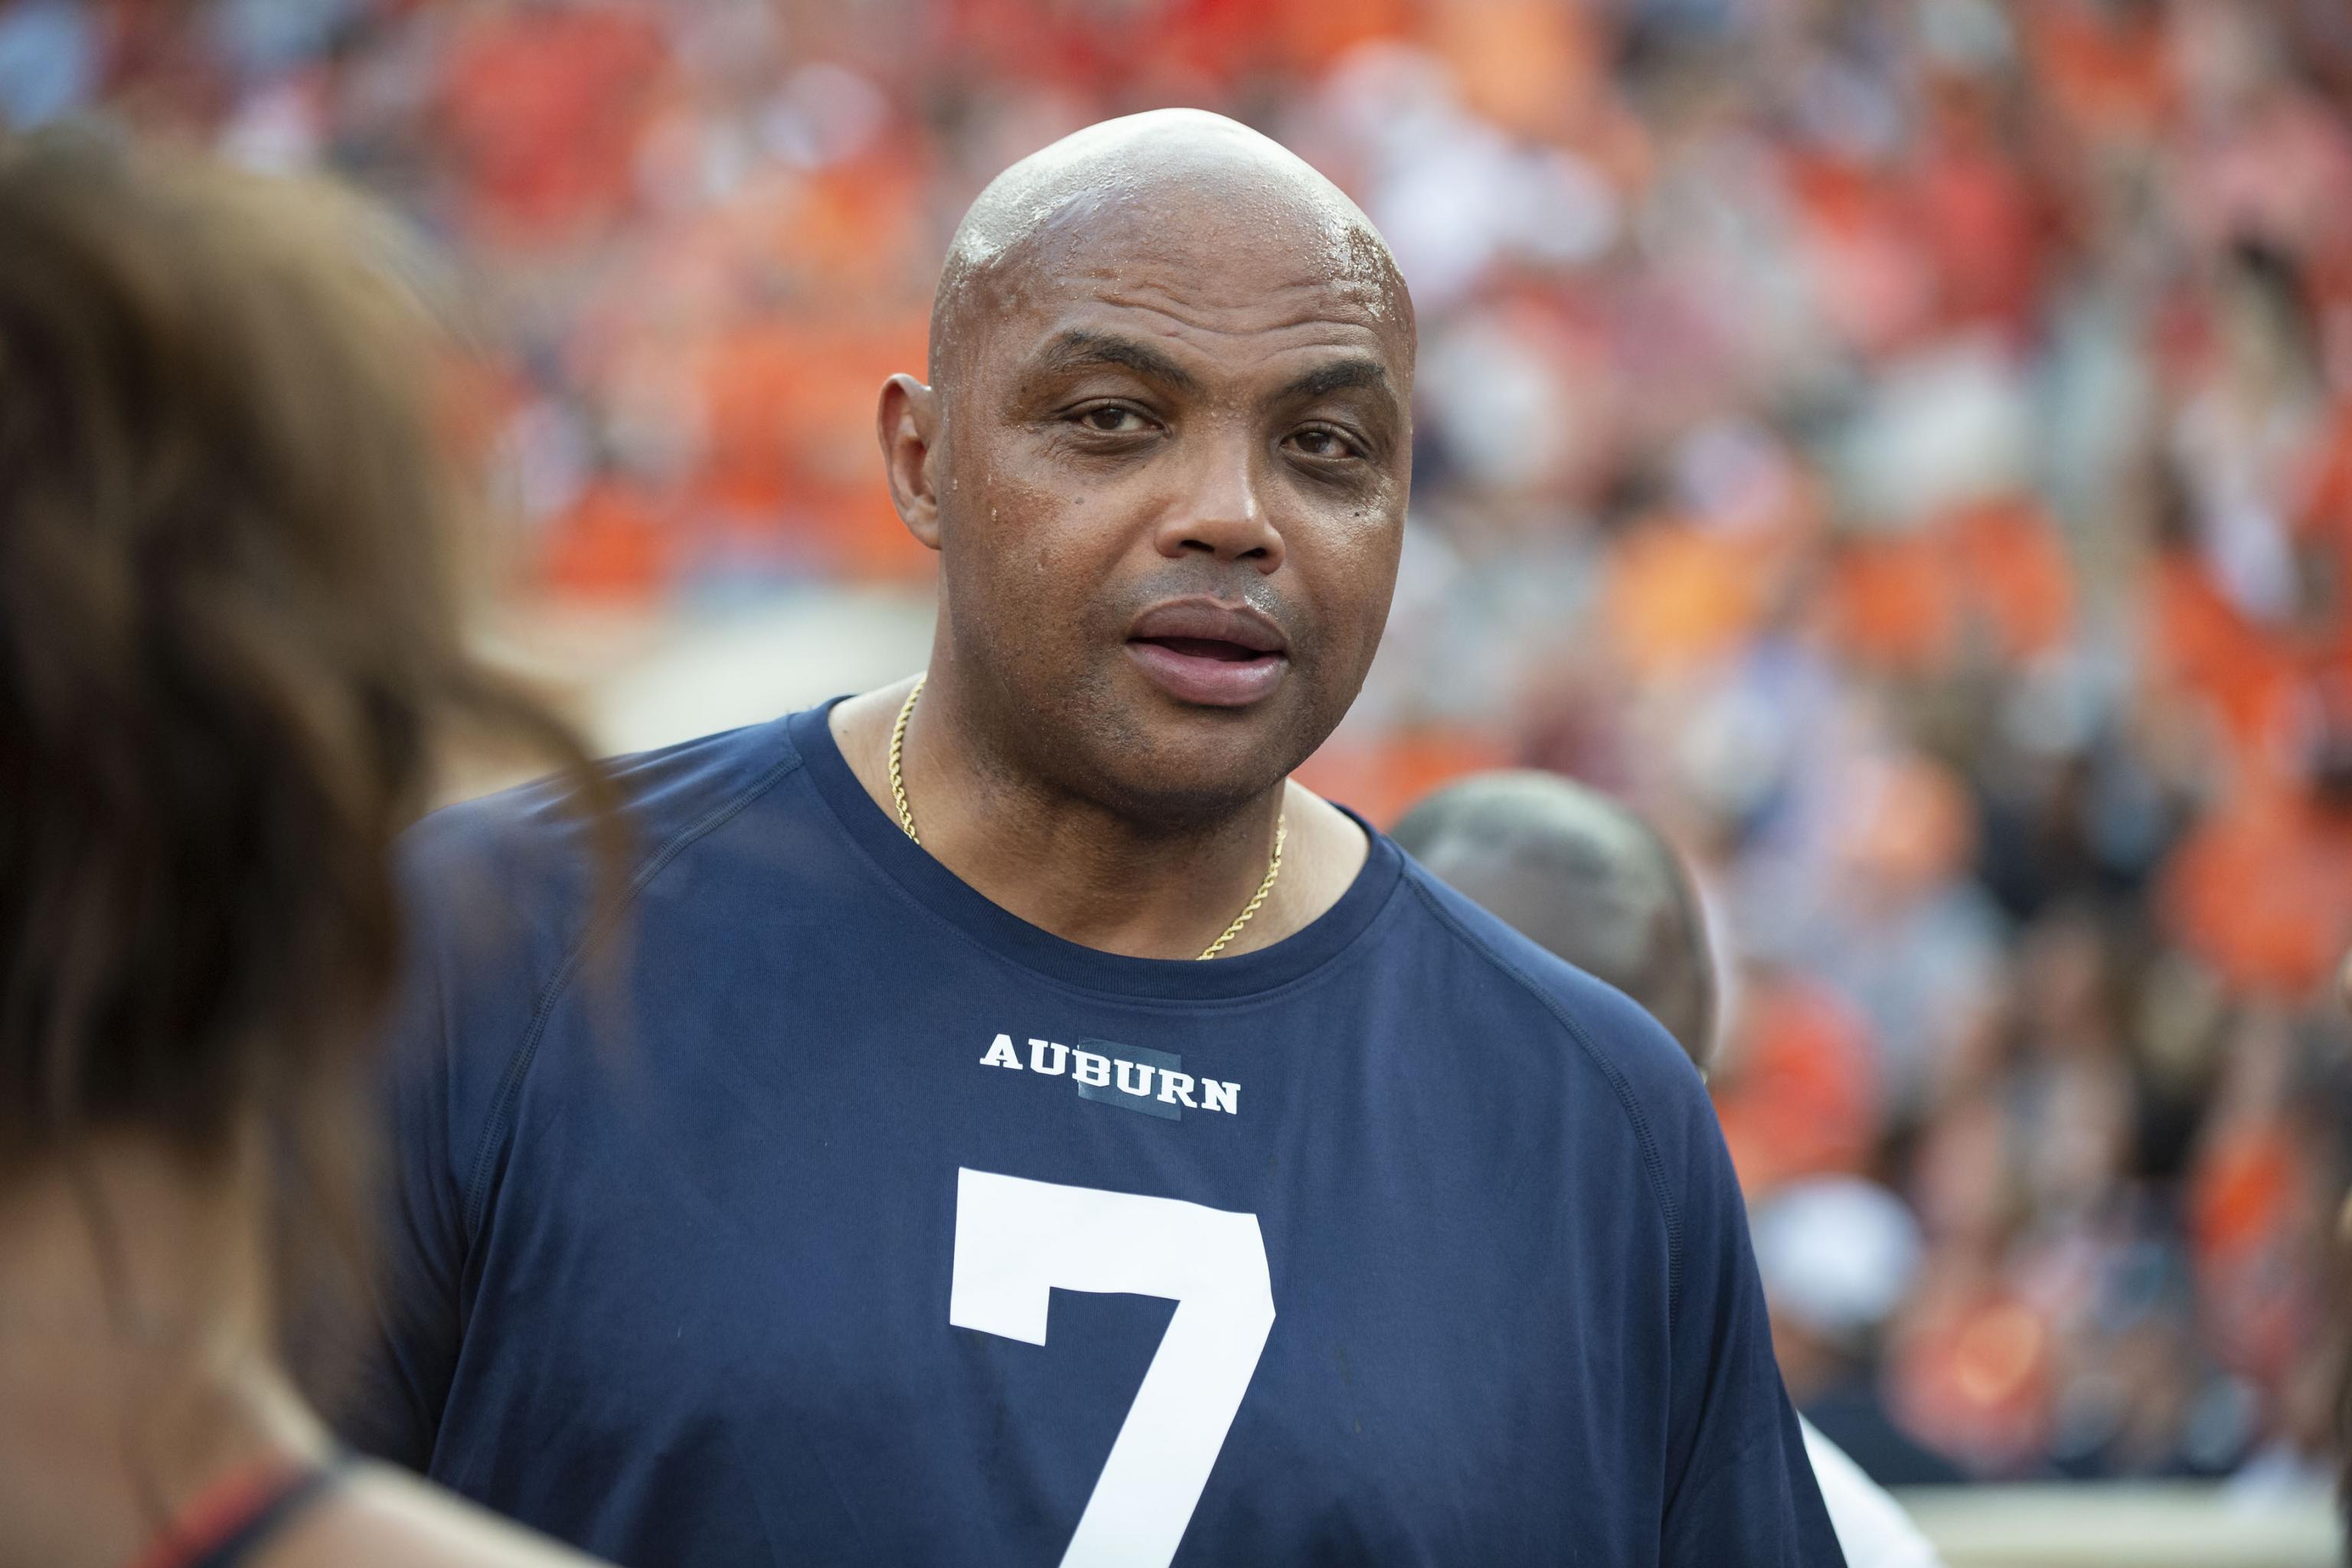 Charles Barkley to sell 1996 Olympic basketball gold medal